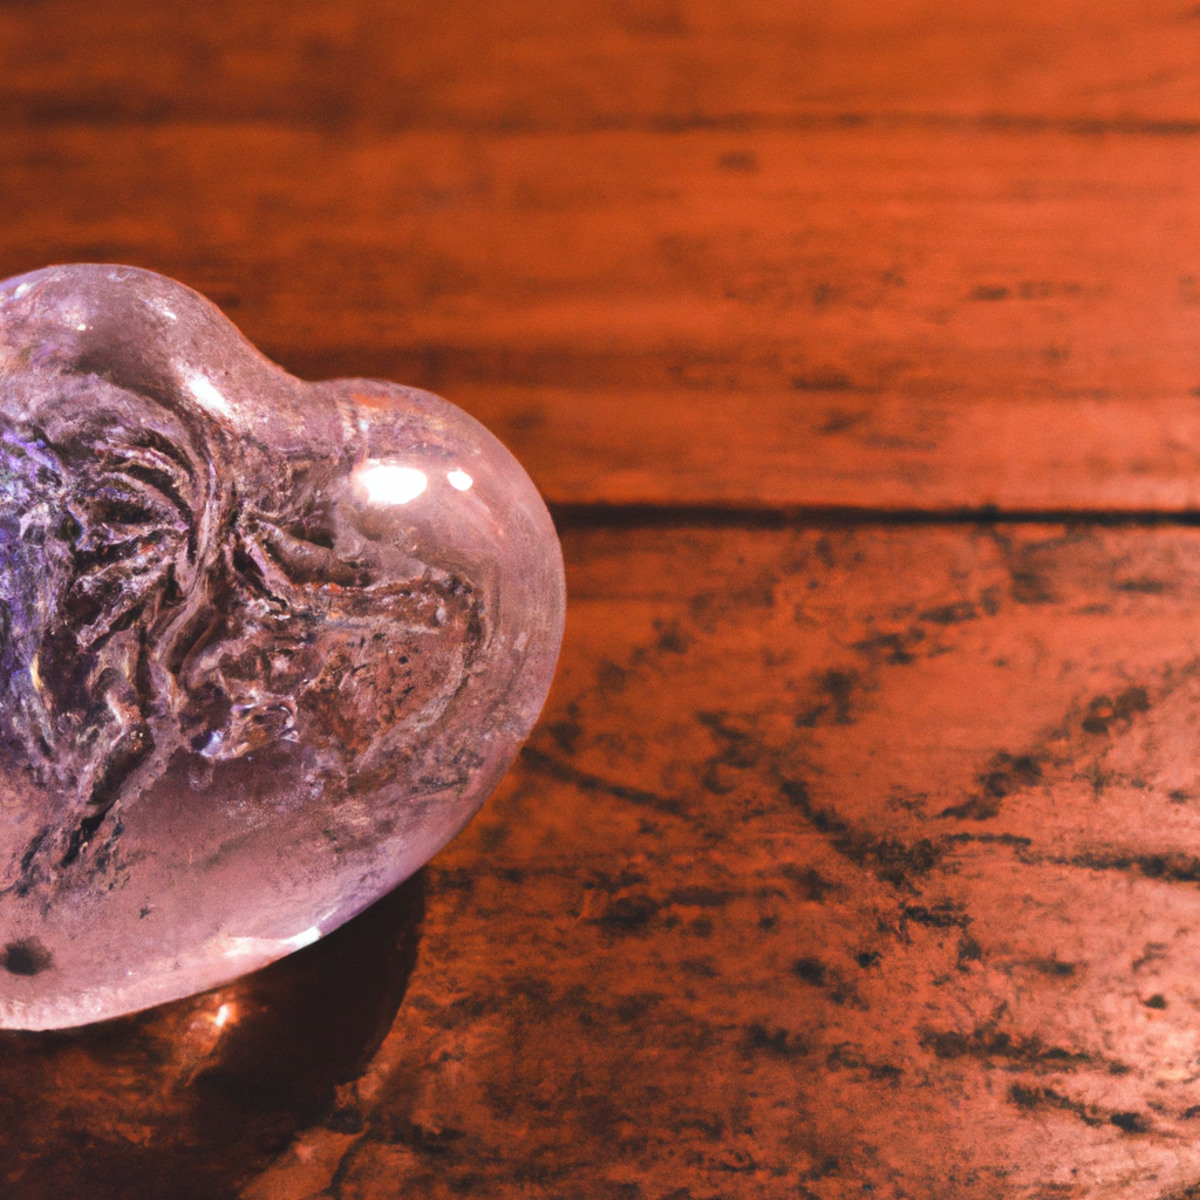 Heart-shaped glass paperweight on wooden desk, symbolizing fragility and elegance, with warm backdrop - Takotsubo Cardiomyopathy (Broken Heart Syndrome)